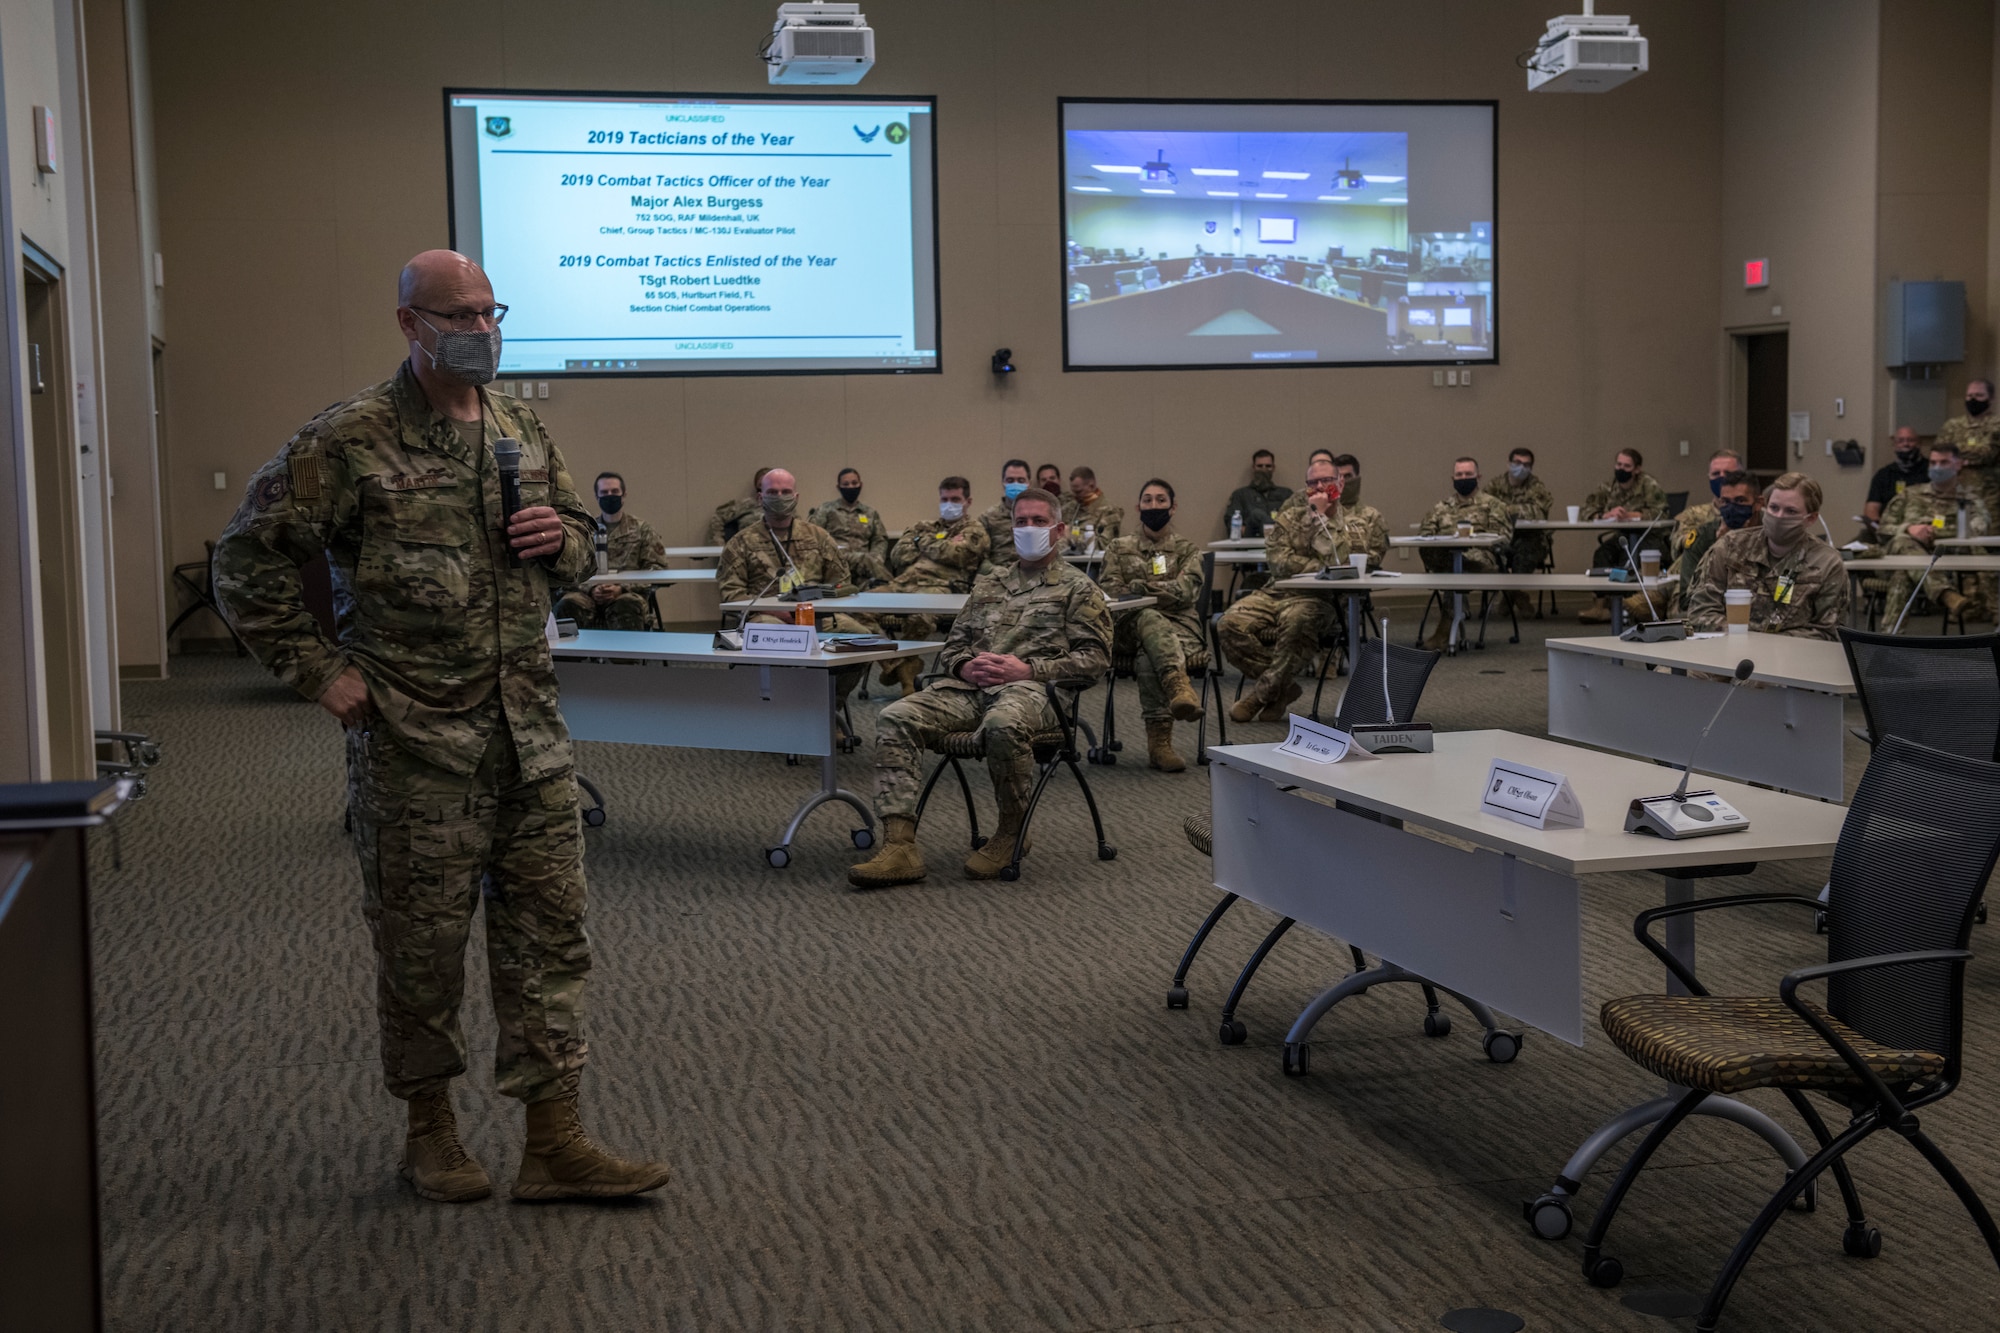 Brig. Gen. Michael Martin, Air Force Special Operations Command Director of Operations, addresses the AFSOC 2020 Weapons and Tactics Conference attendees.